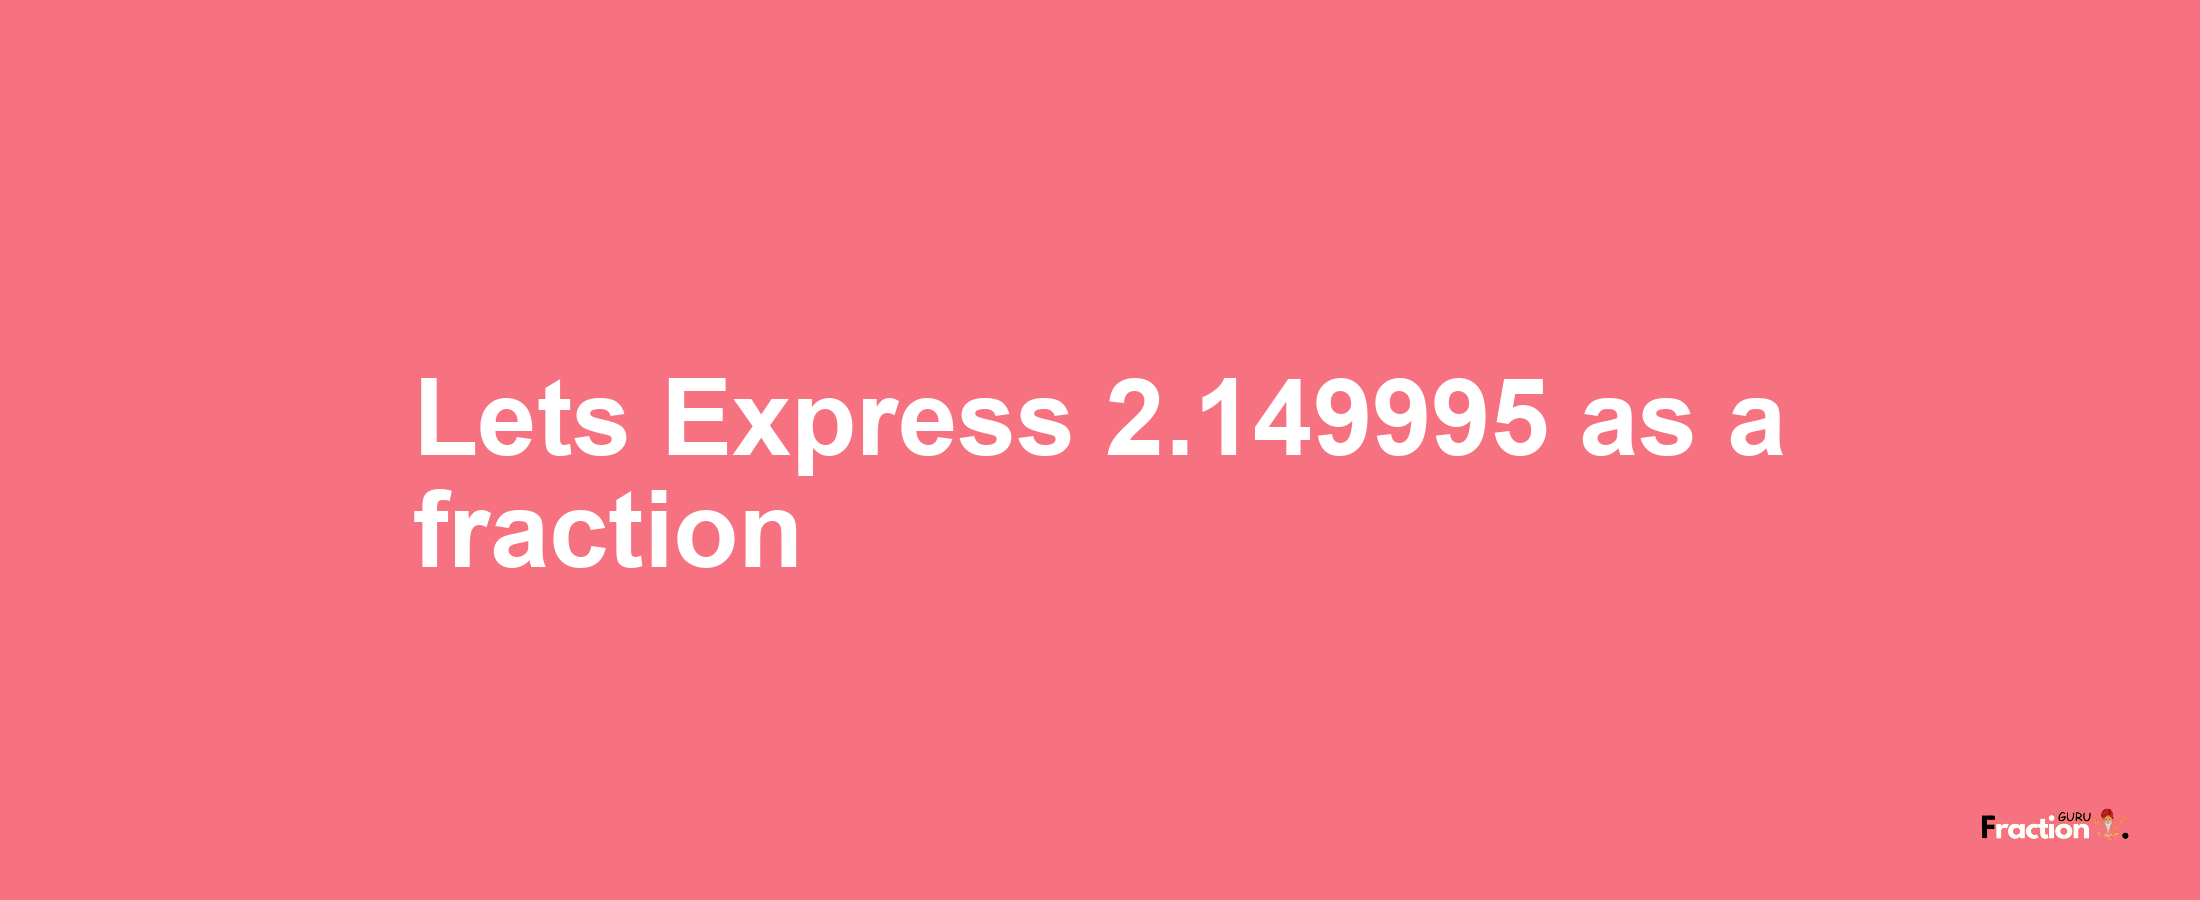 Lets Express 2.149995 as afraction